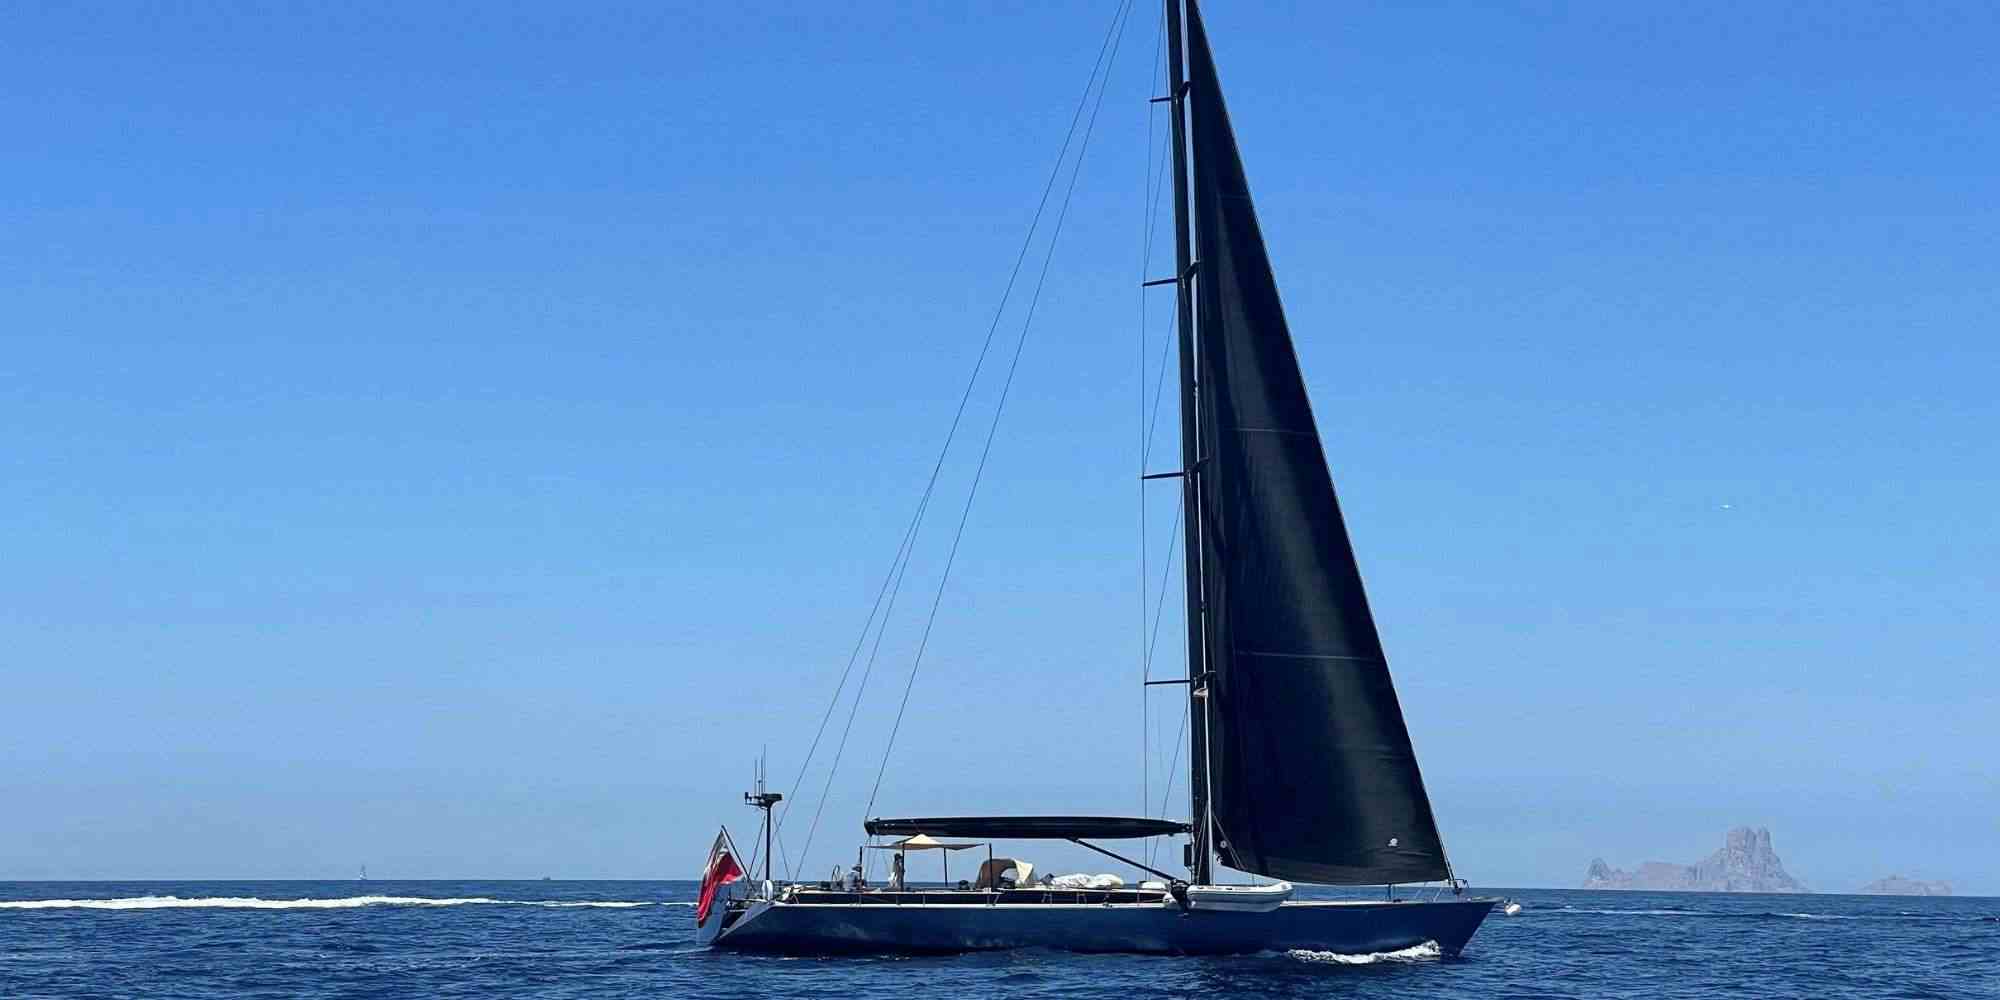 WALLY ONE - Sailboat Charter Spain & Boat hire in W. Med -Naples/Sicily, W. Med -Riviera/Cors/Sard., W. Med - Spain/Balearics 1